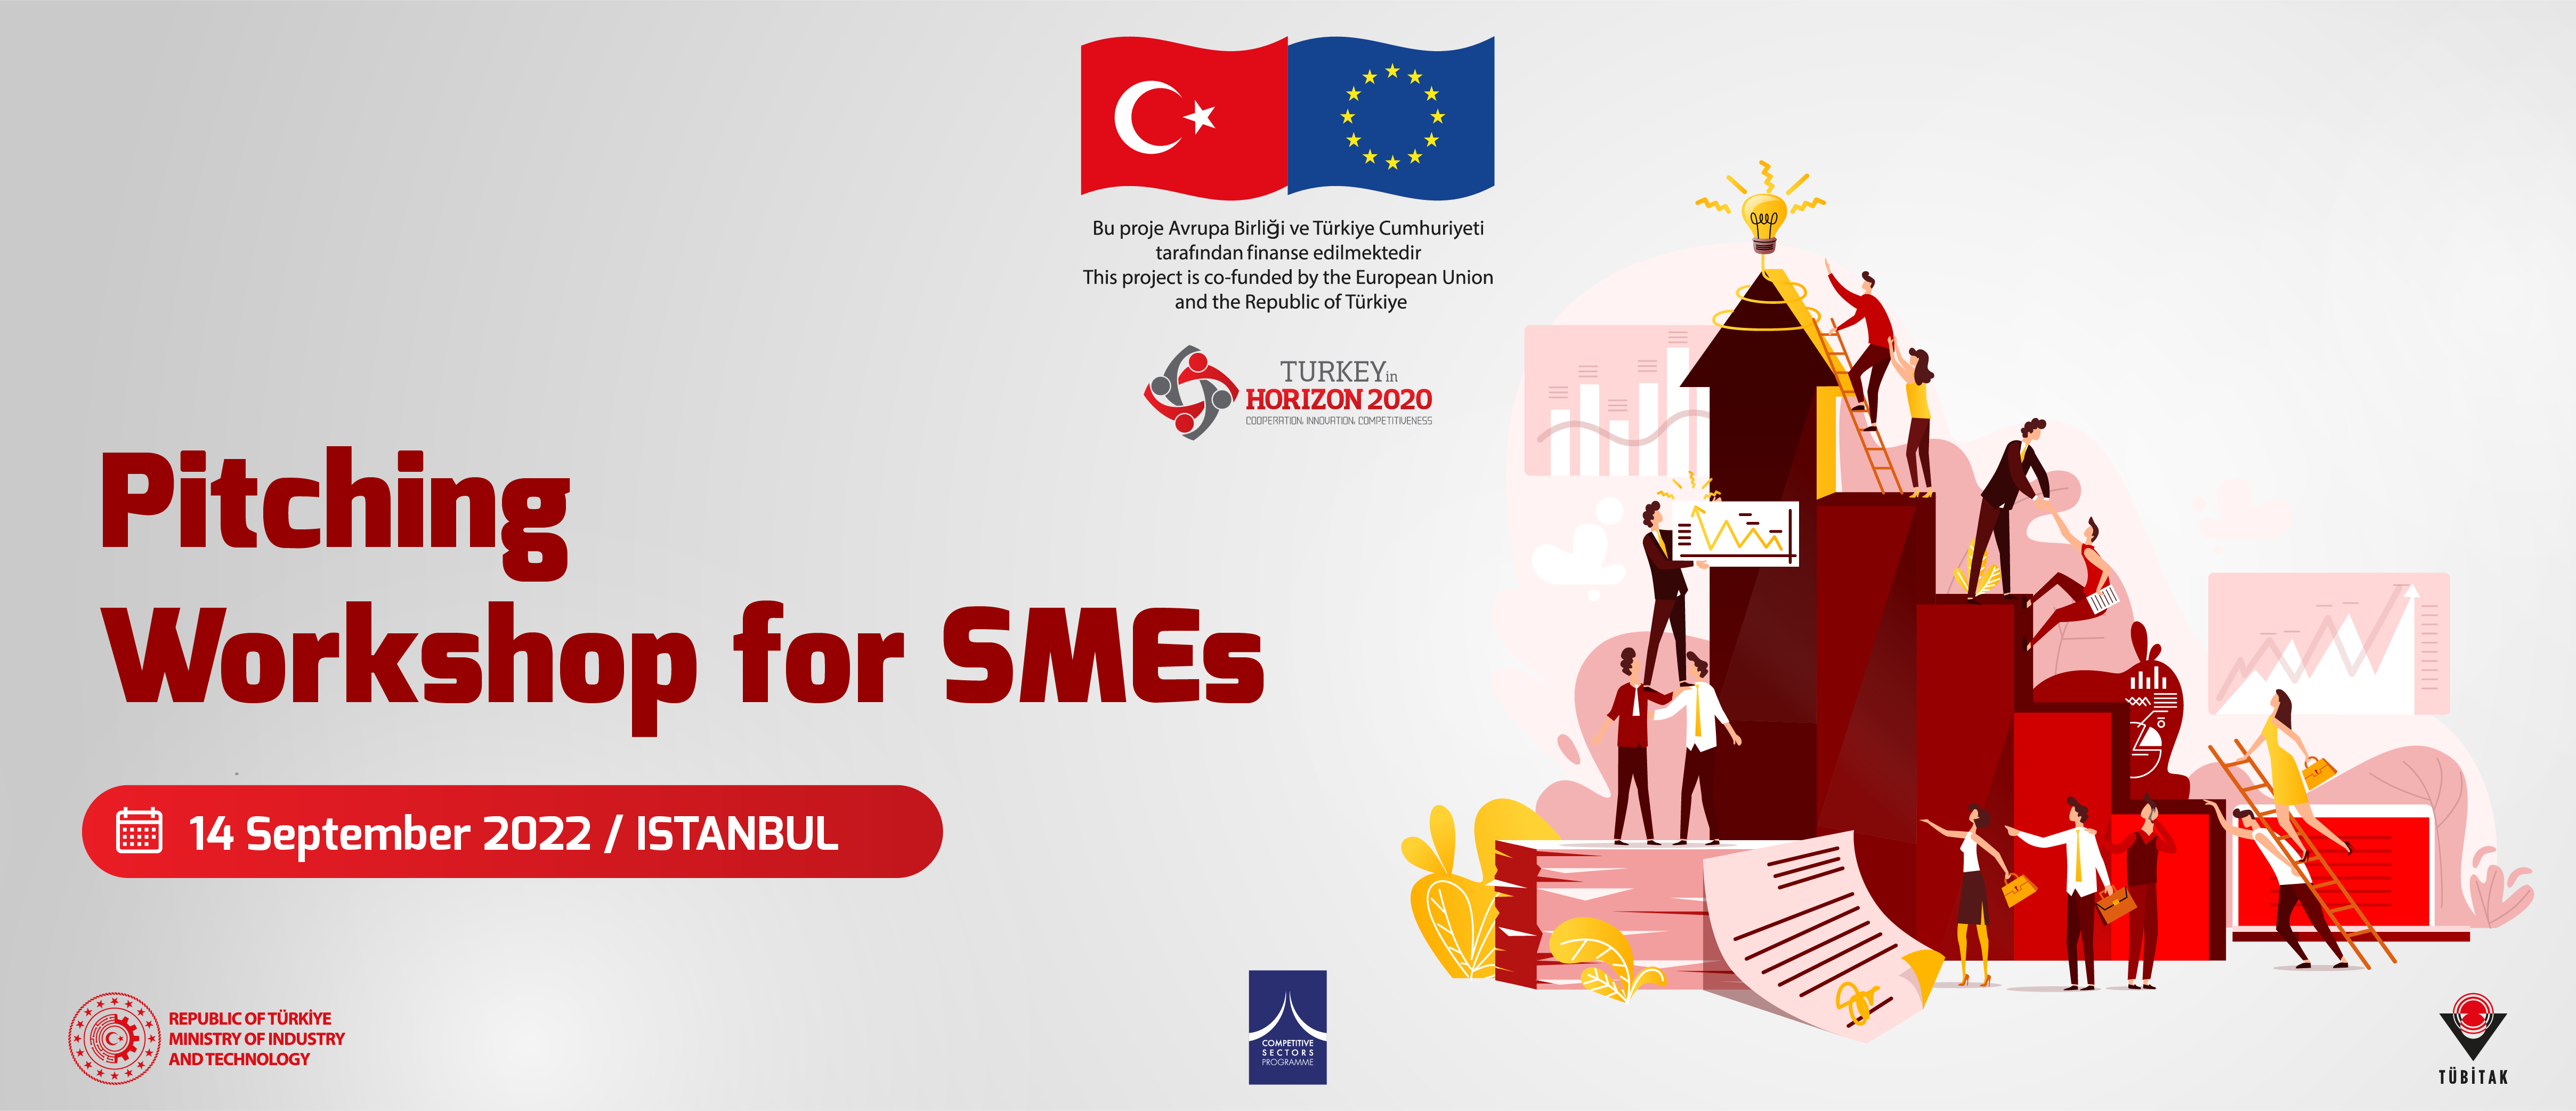 Pitching_Workshop_for_SMEs_banner_-03.png